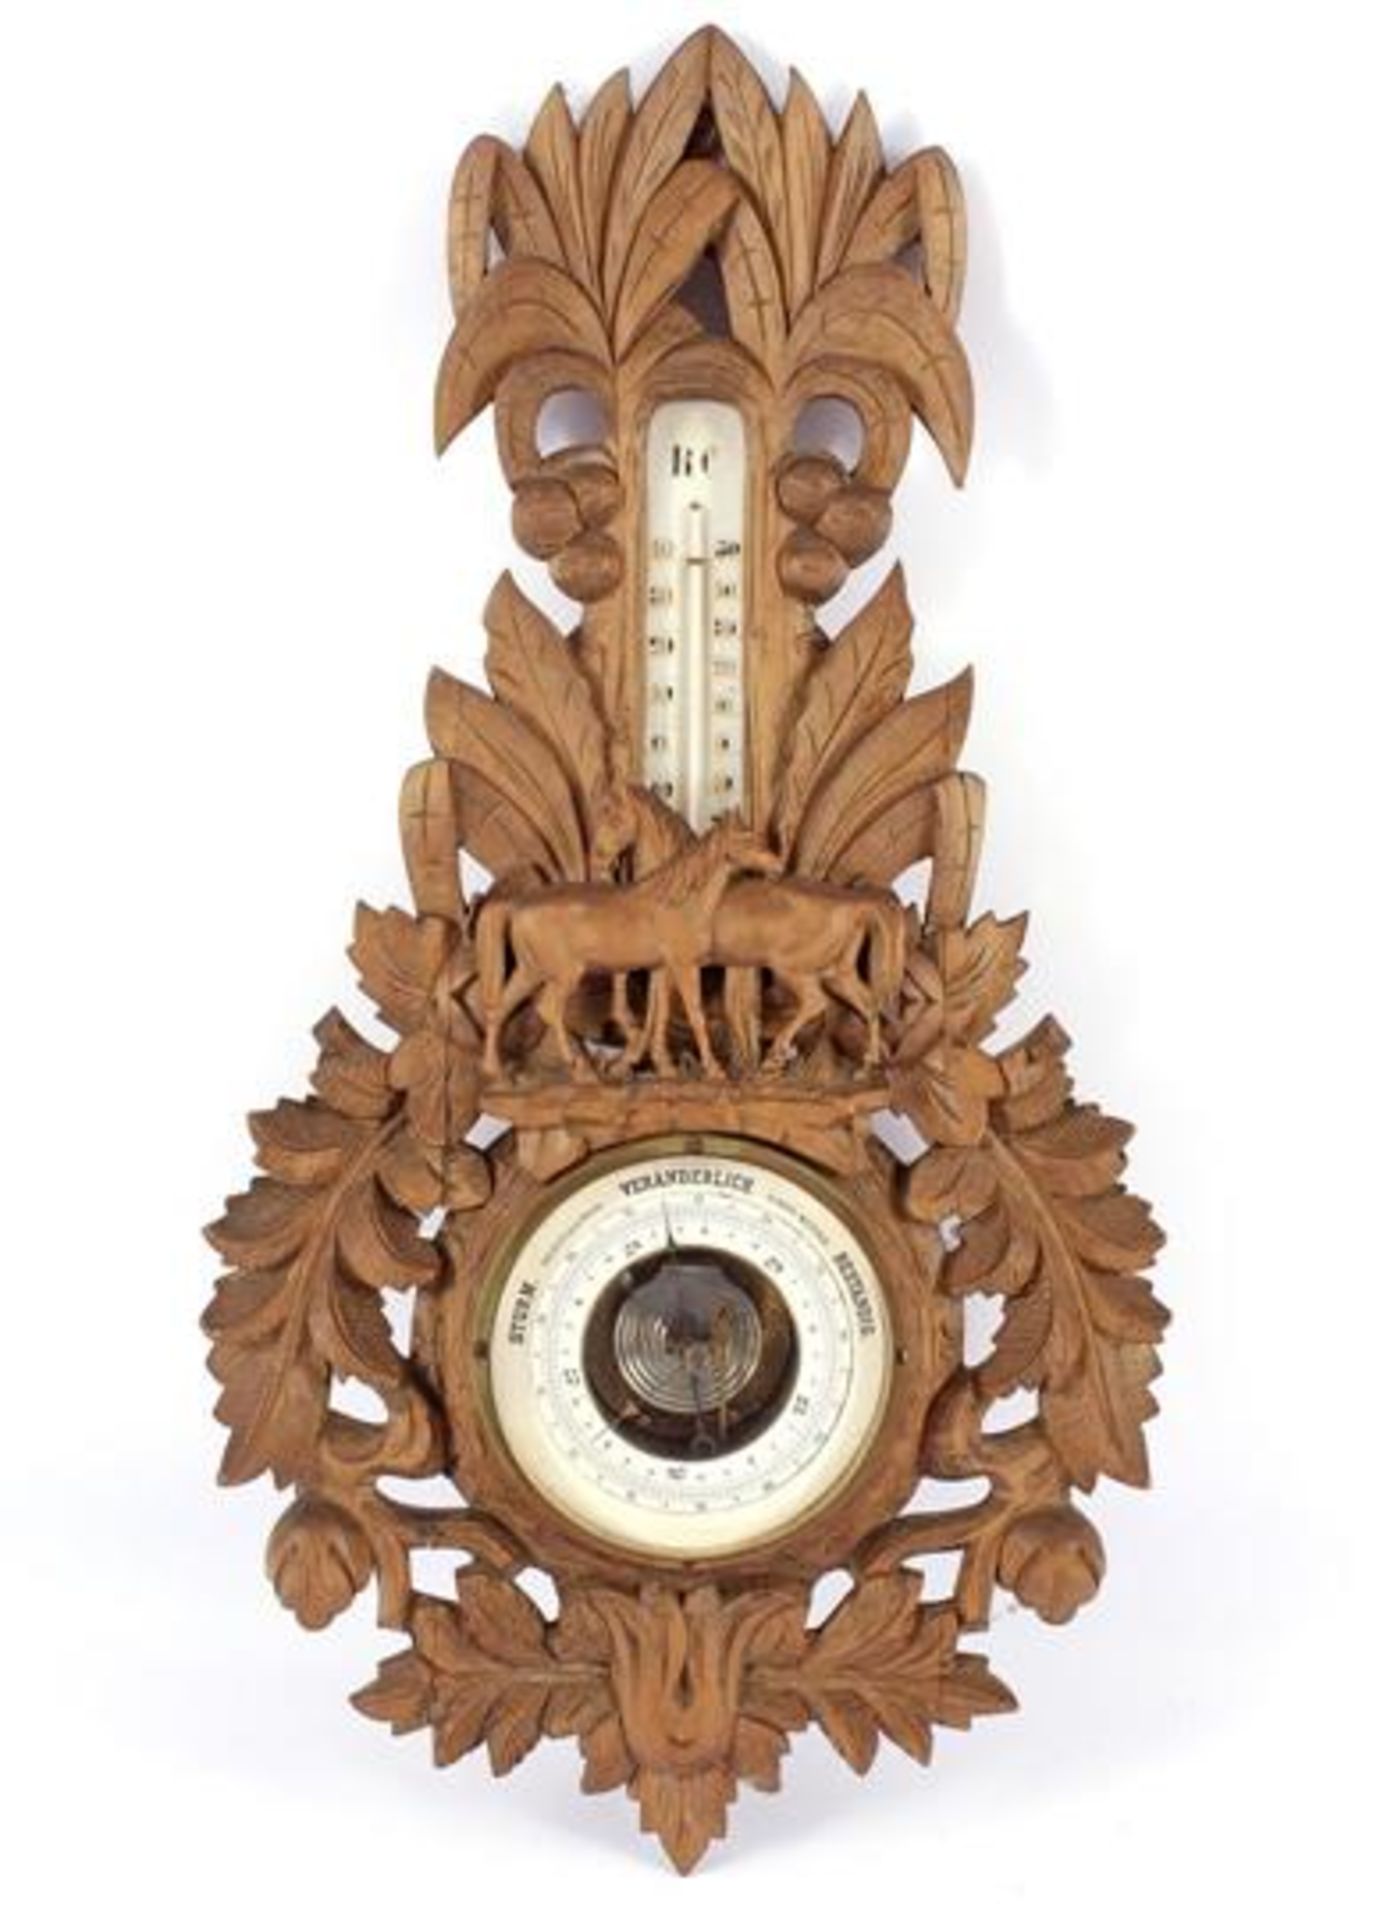 Dutch barometer in a richly decorated cabinet with horses, 61 cm high